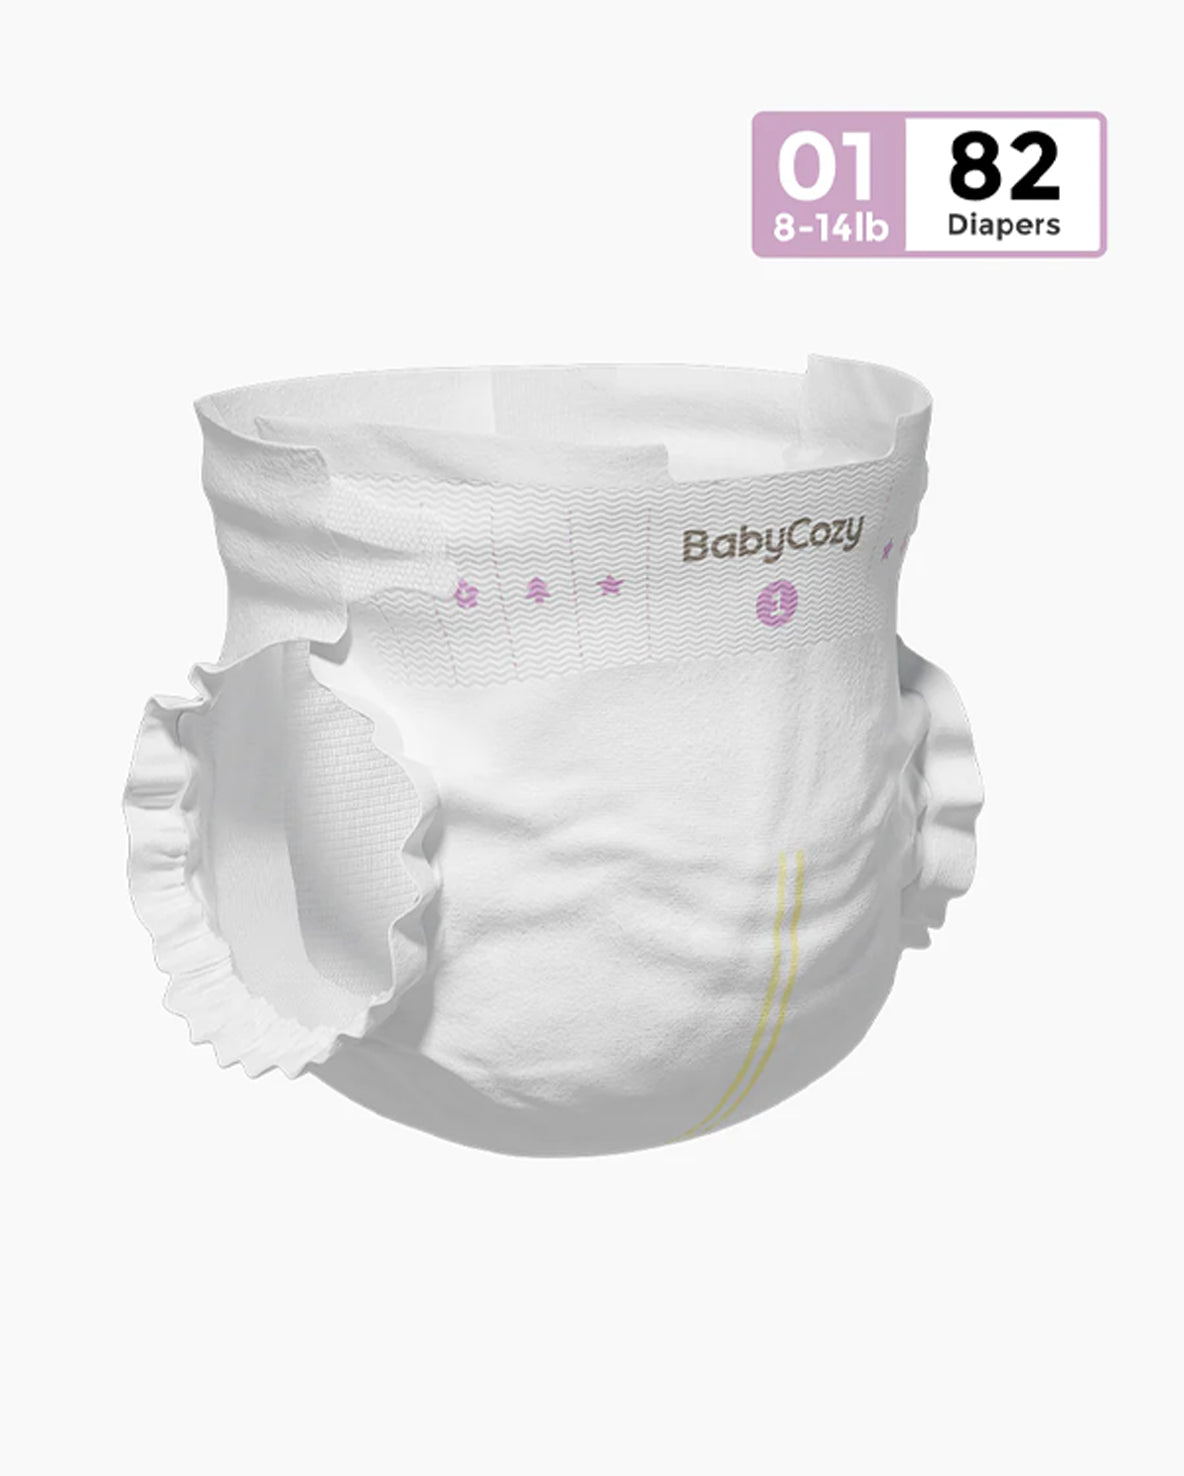 BabyCozy "Bouncy Soft" Diapers For Newborns